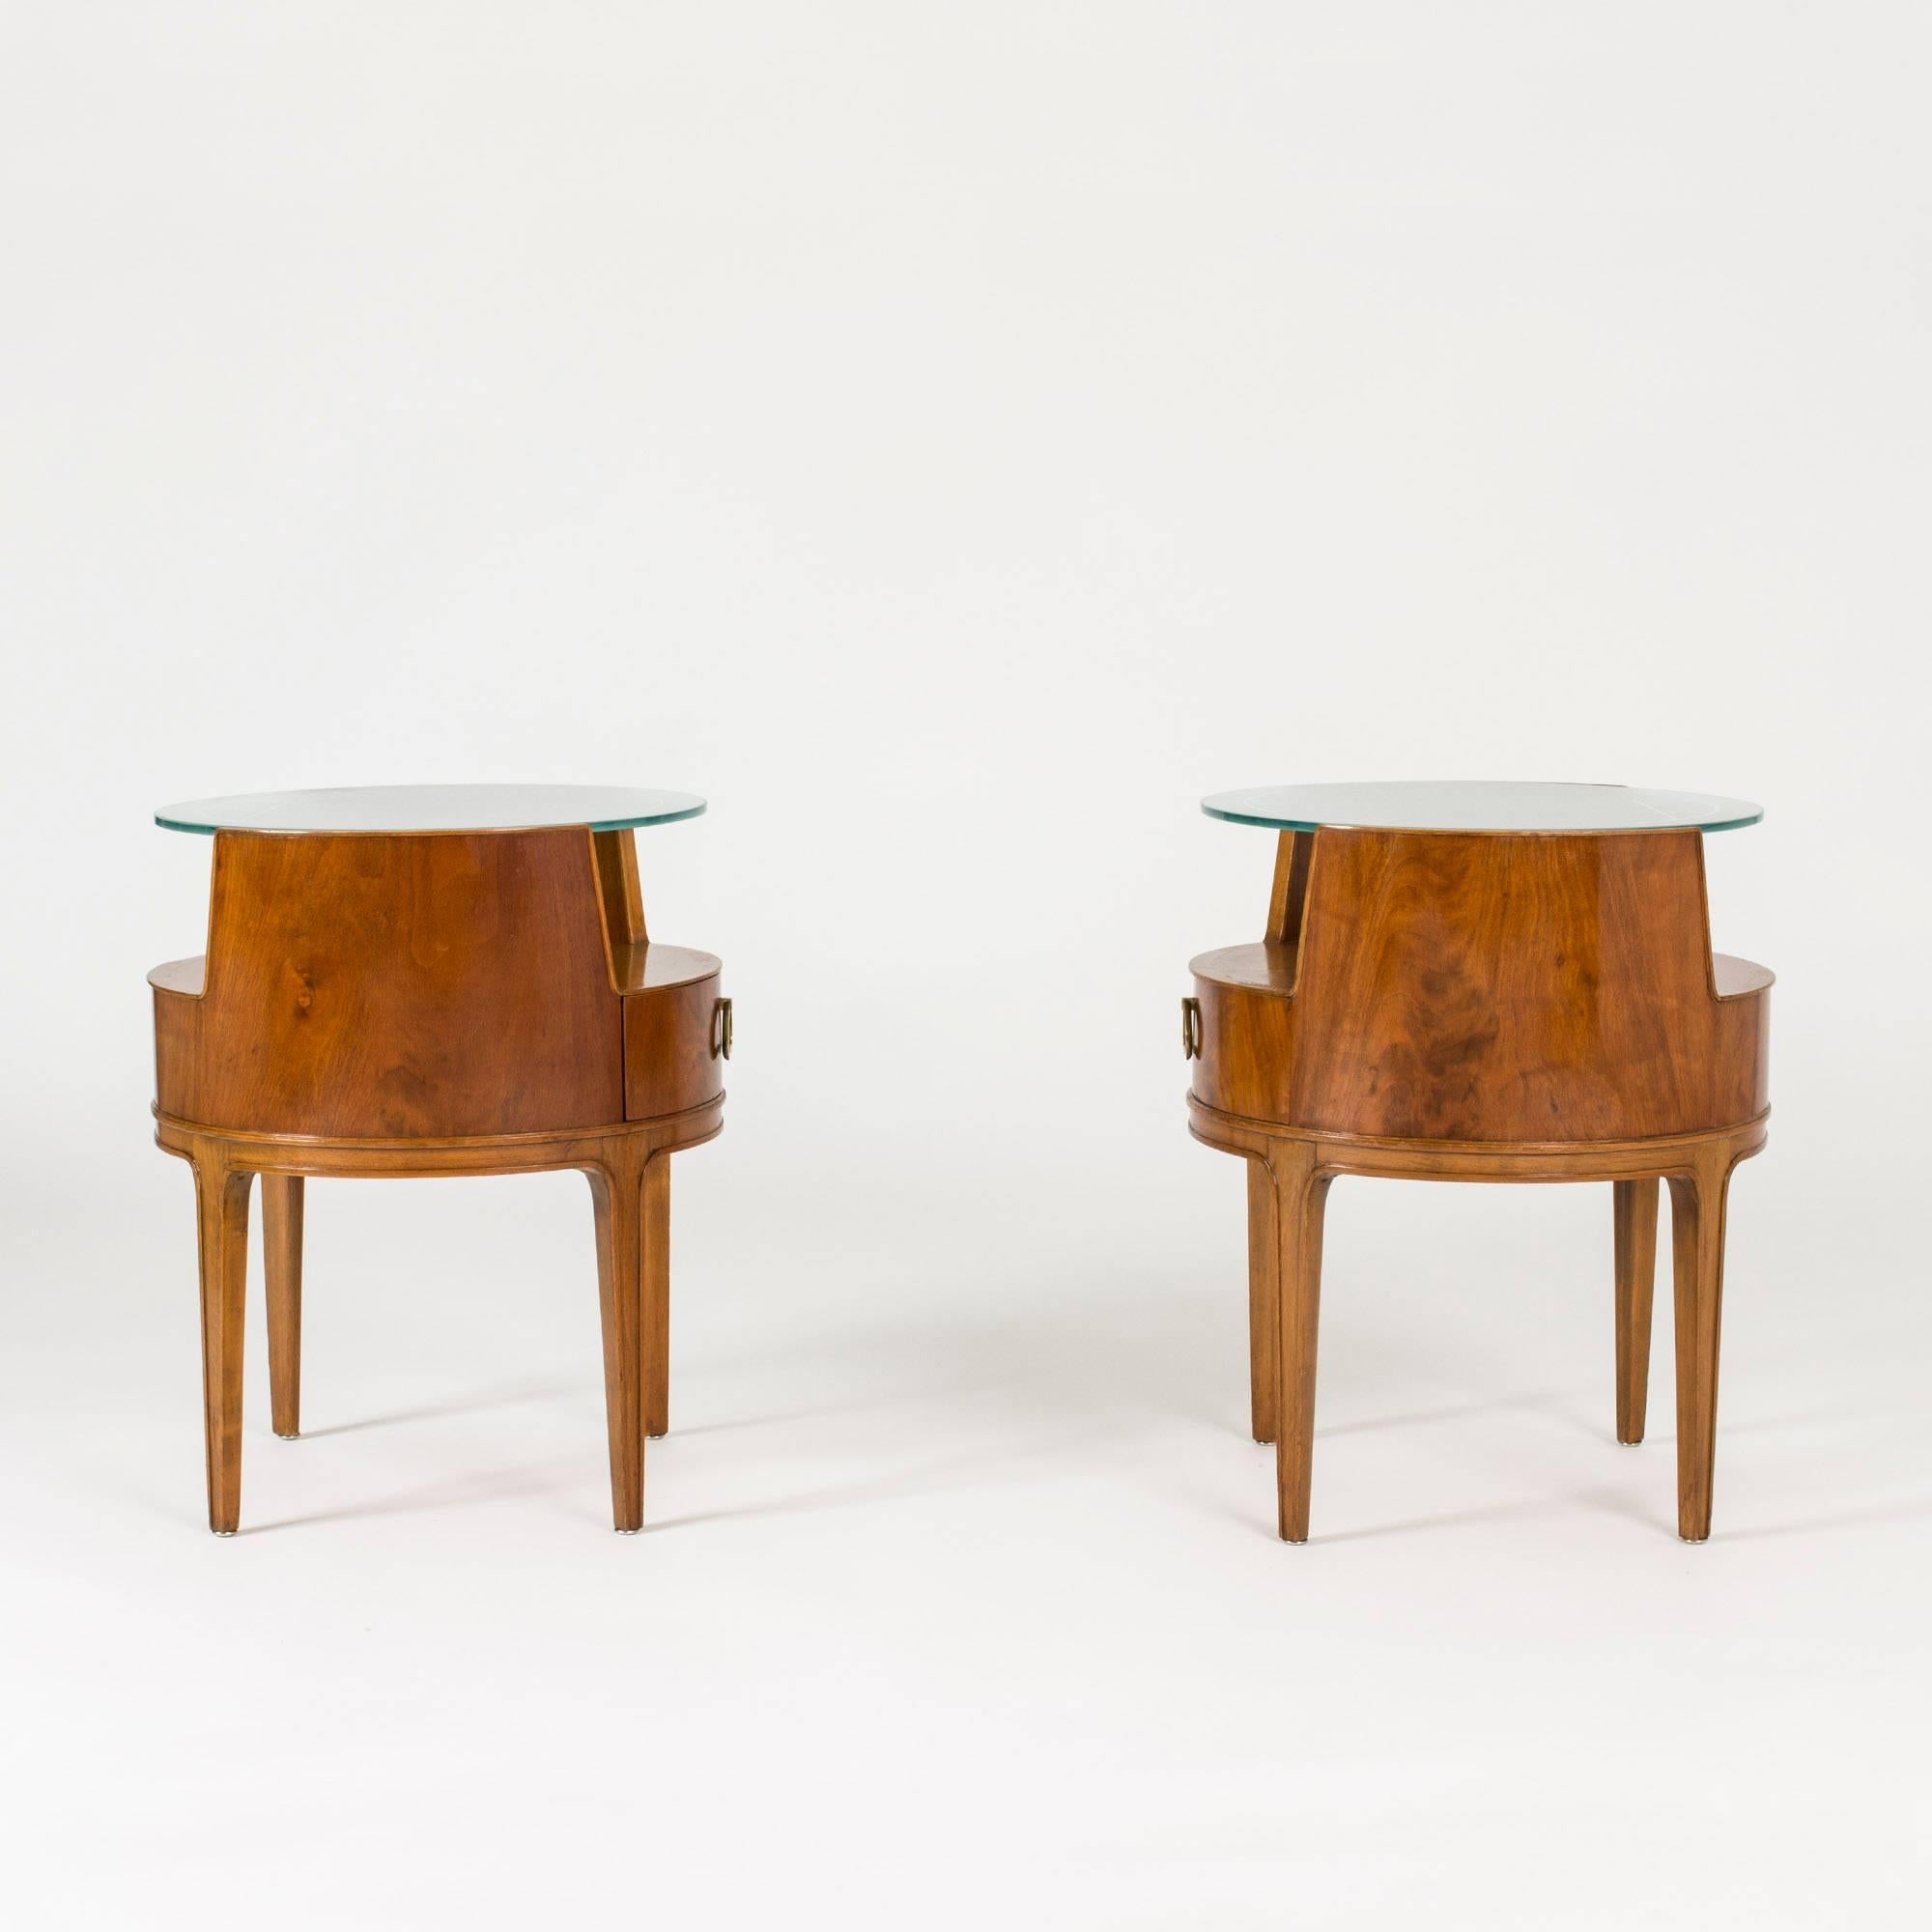 Scandinavian Modern Pair of Mahogany and Glass Bedside Tables by Axel Larsson